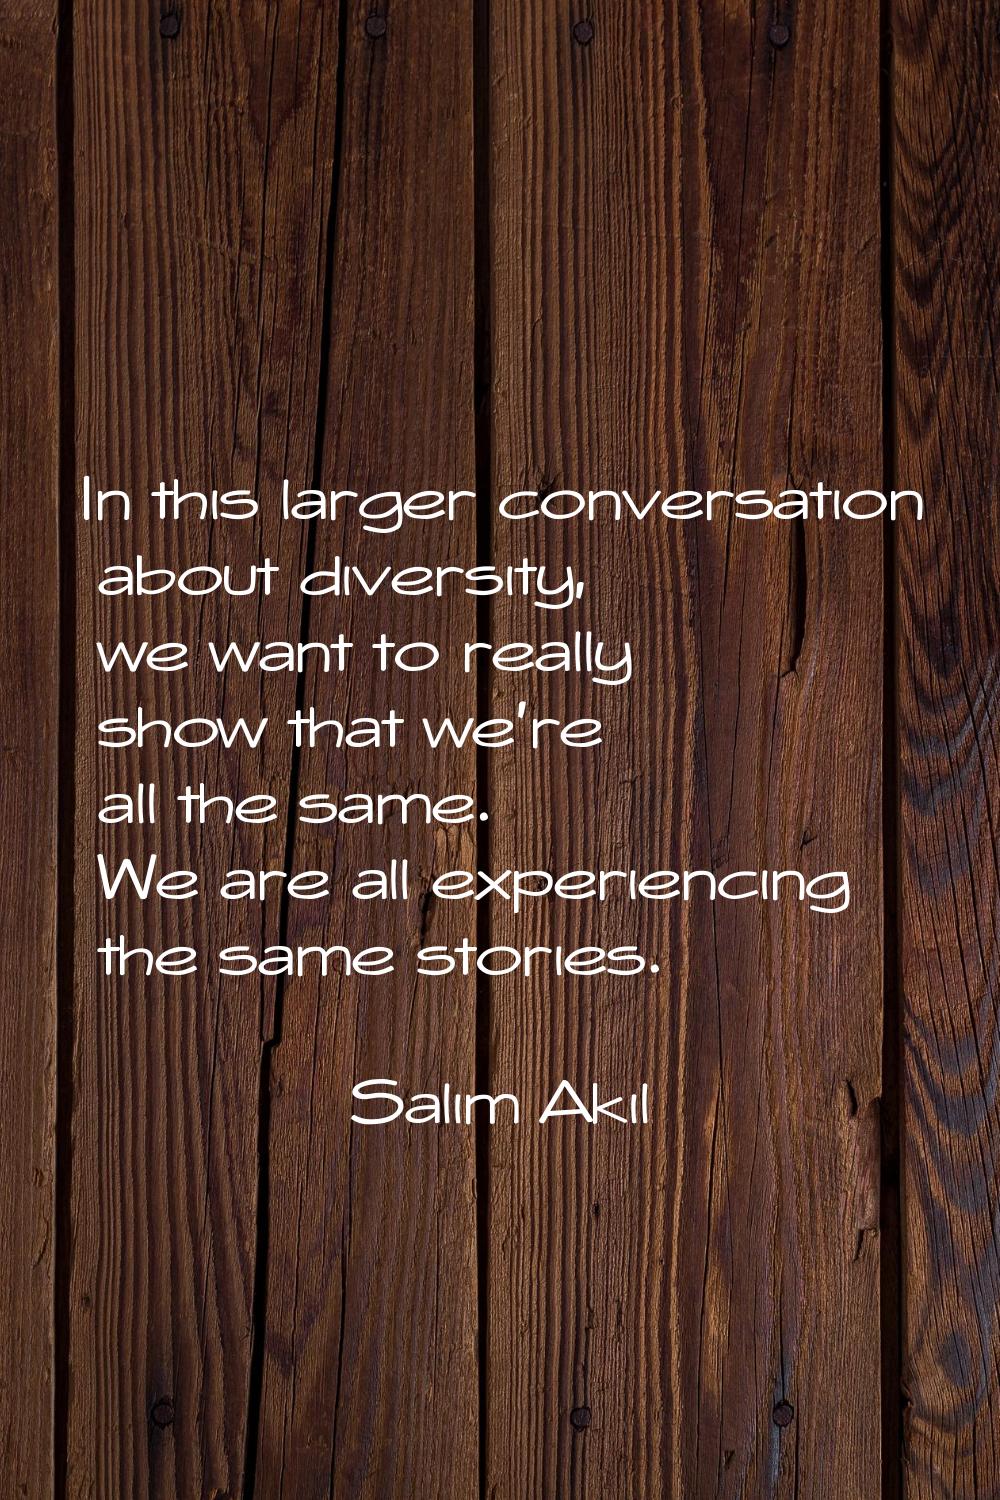 In this larger conversation about diversity, we want to really show that we're all the same. We are